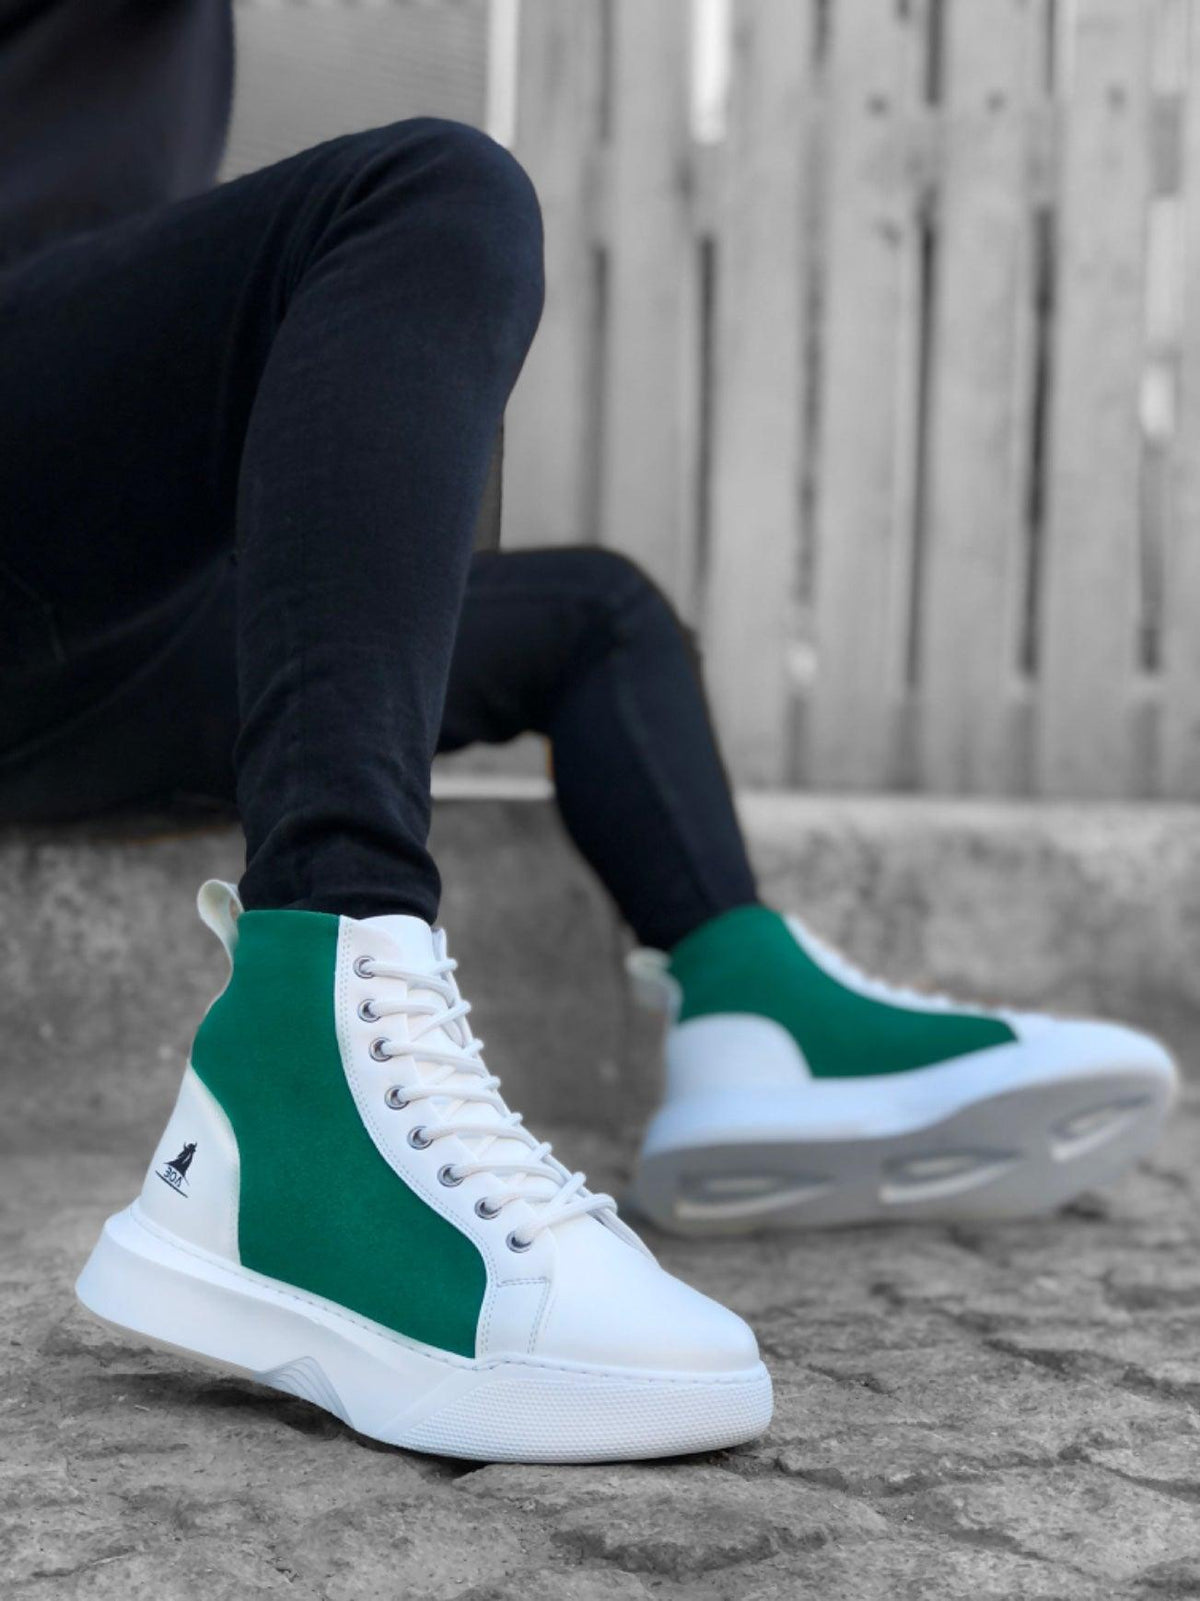 BA0256 Lace-up Men's High Sole White Green Sole Sports Boots - STREET MODE ™